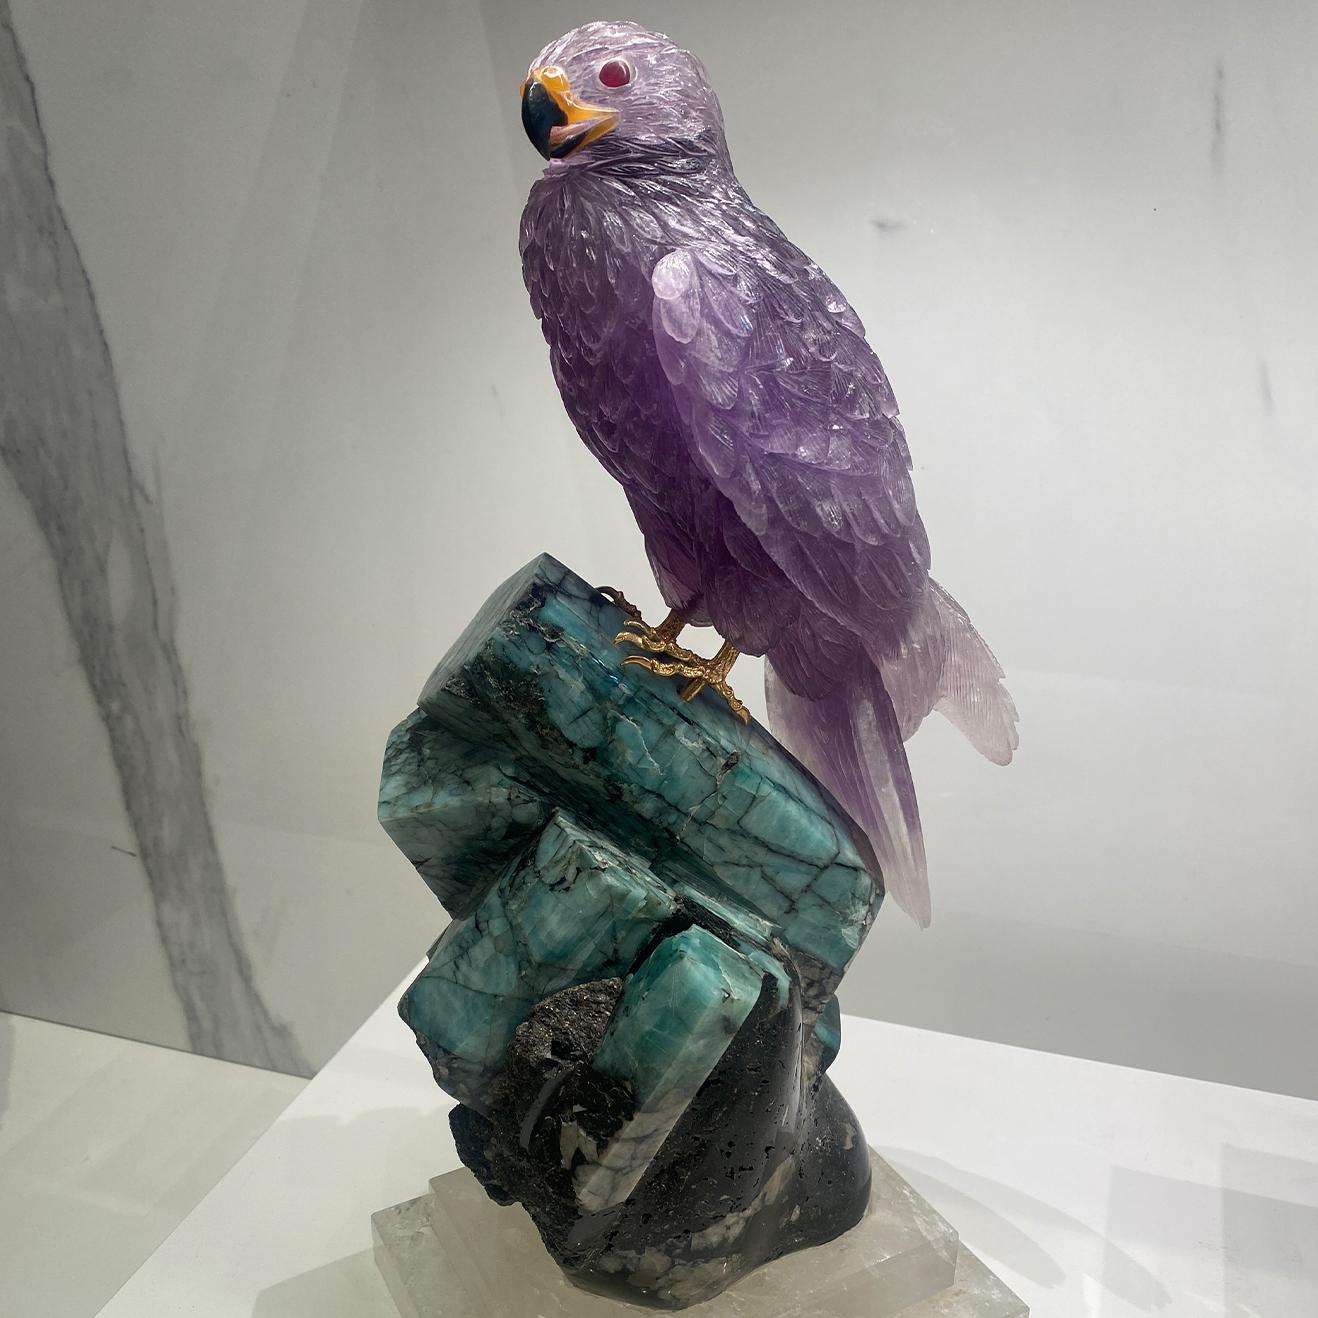 A rare, one-of-a-kind sculpture of a hand carved amethyst falcon, perched atop an emerald crystal base, stabilised by a platform carved from fine natural quartz crystal.

- A hand carved falcon using fine quality natural amethyst crystal
- The